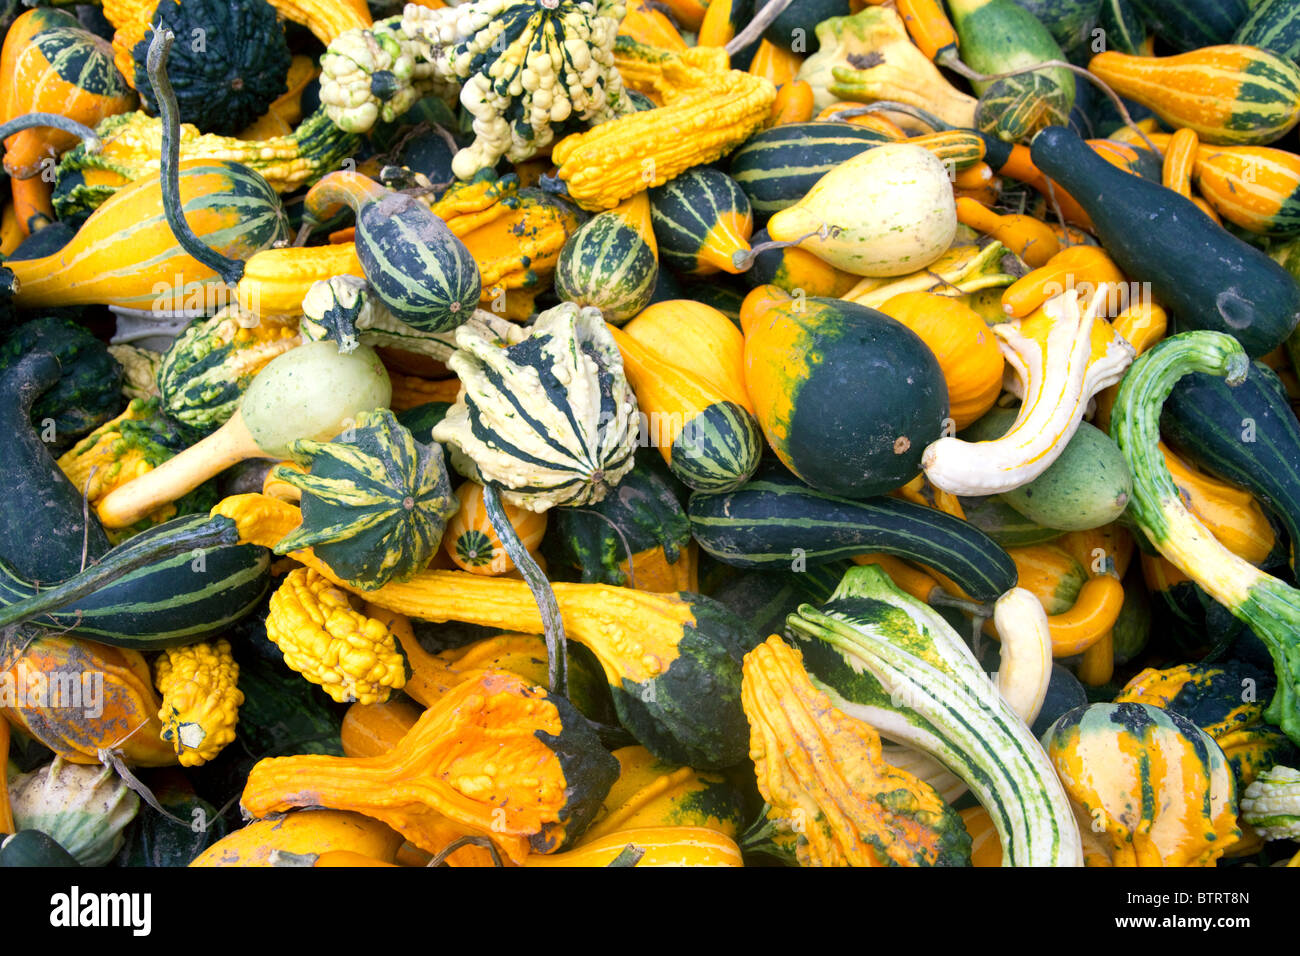 Assortment of gourds at a produce stand in Idaho, USA. Stock Photo